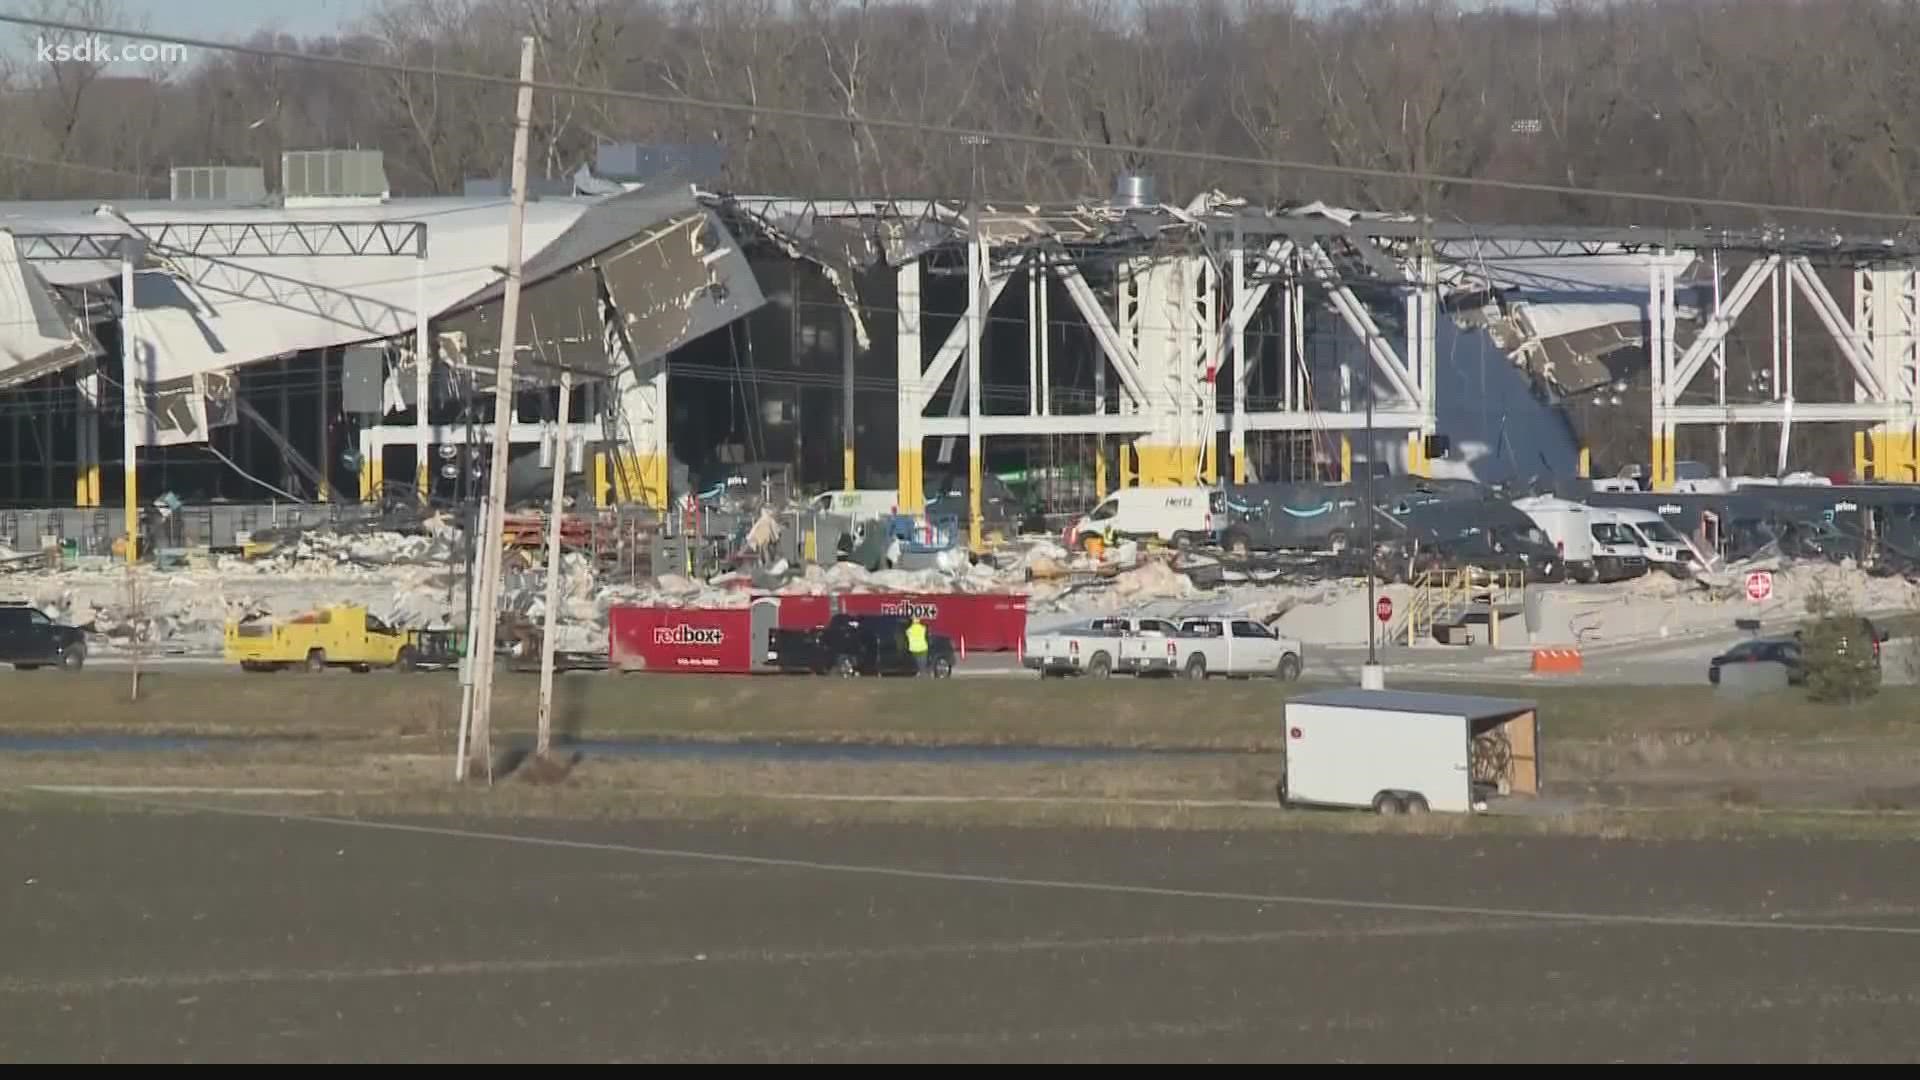 Six people died Friday night when an EF-3 tornado tore through the facility.